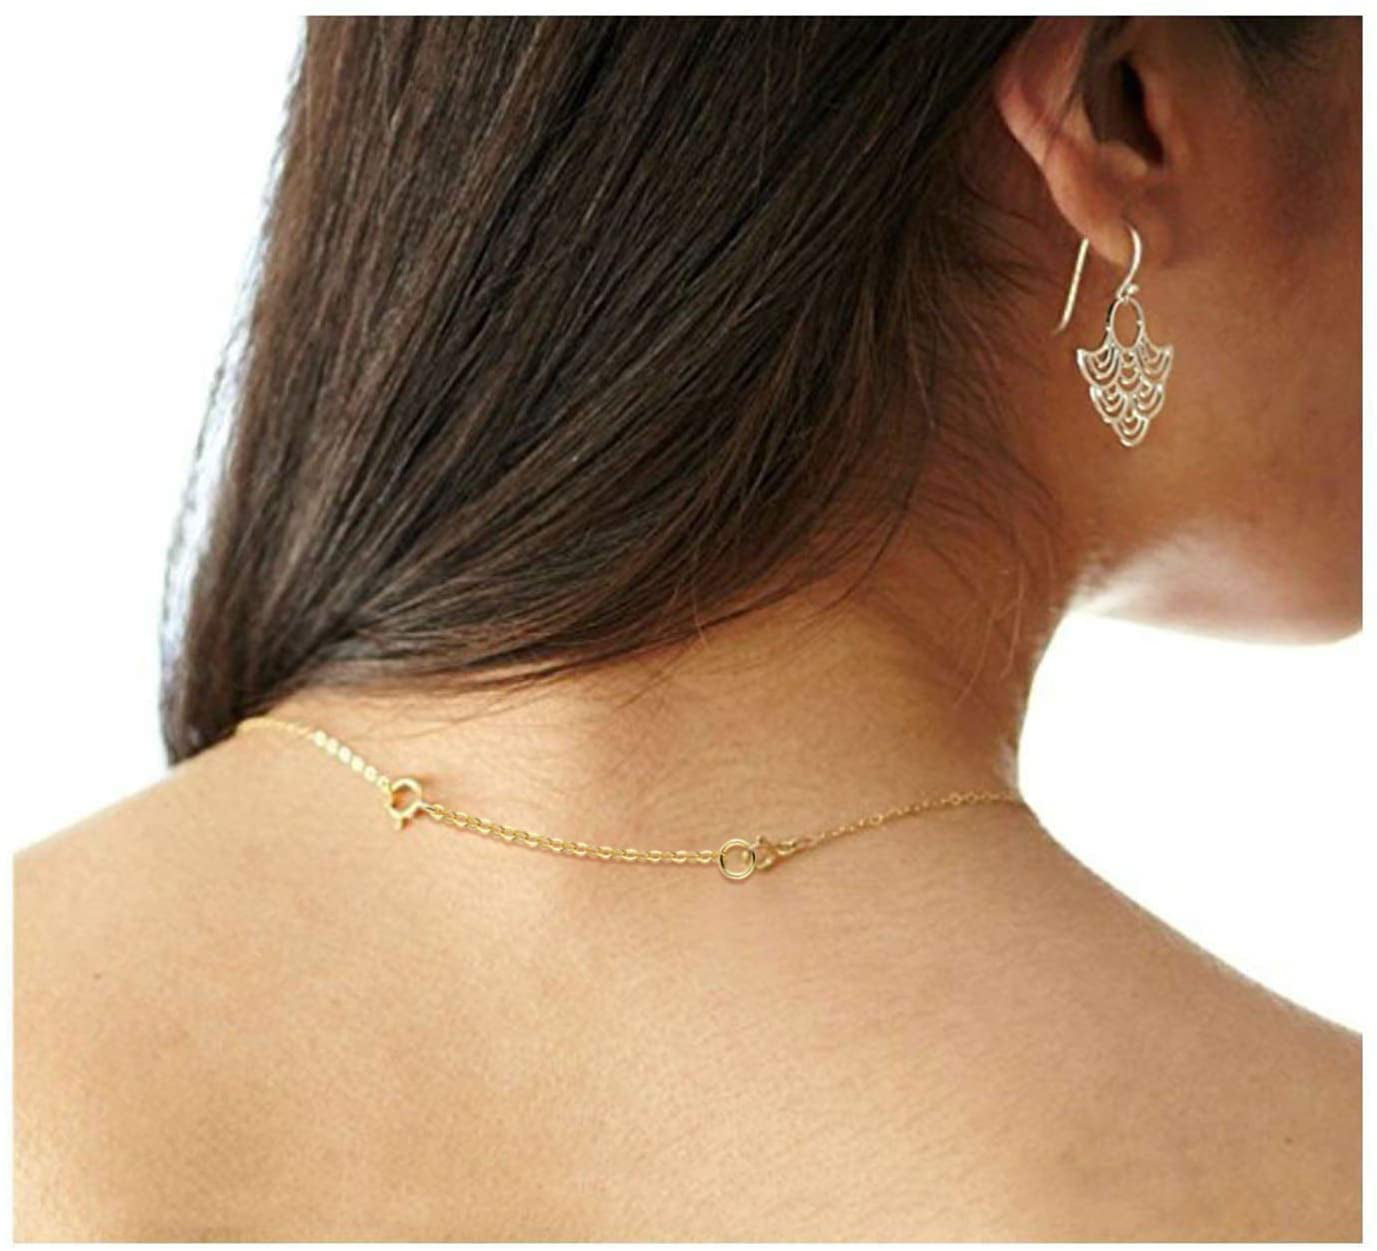  Sterling Silver Necklace Extenders Silver Extenders for  Necklaces Extender Sterling Silver Extenders Chains Necklace Extender for  Women Bracelet Extender 1inch 2inch 3inch : Clothing, Shoes & Jewelry